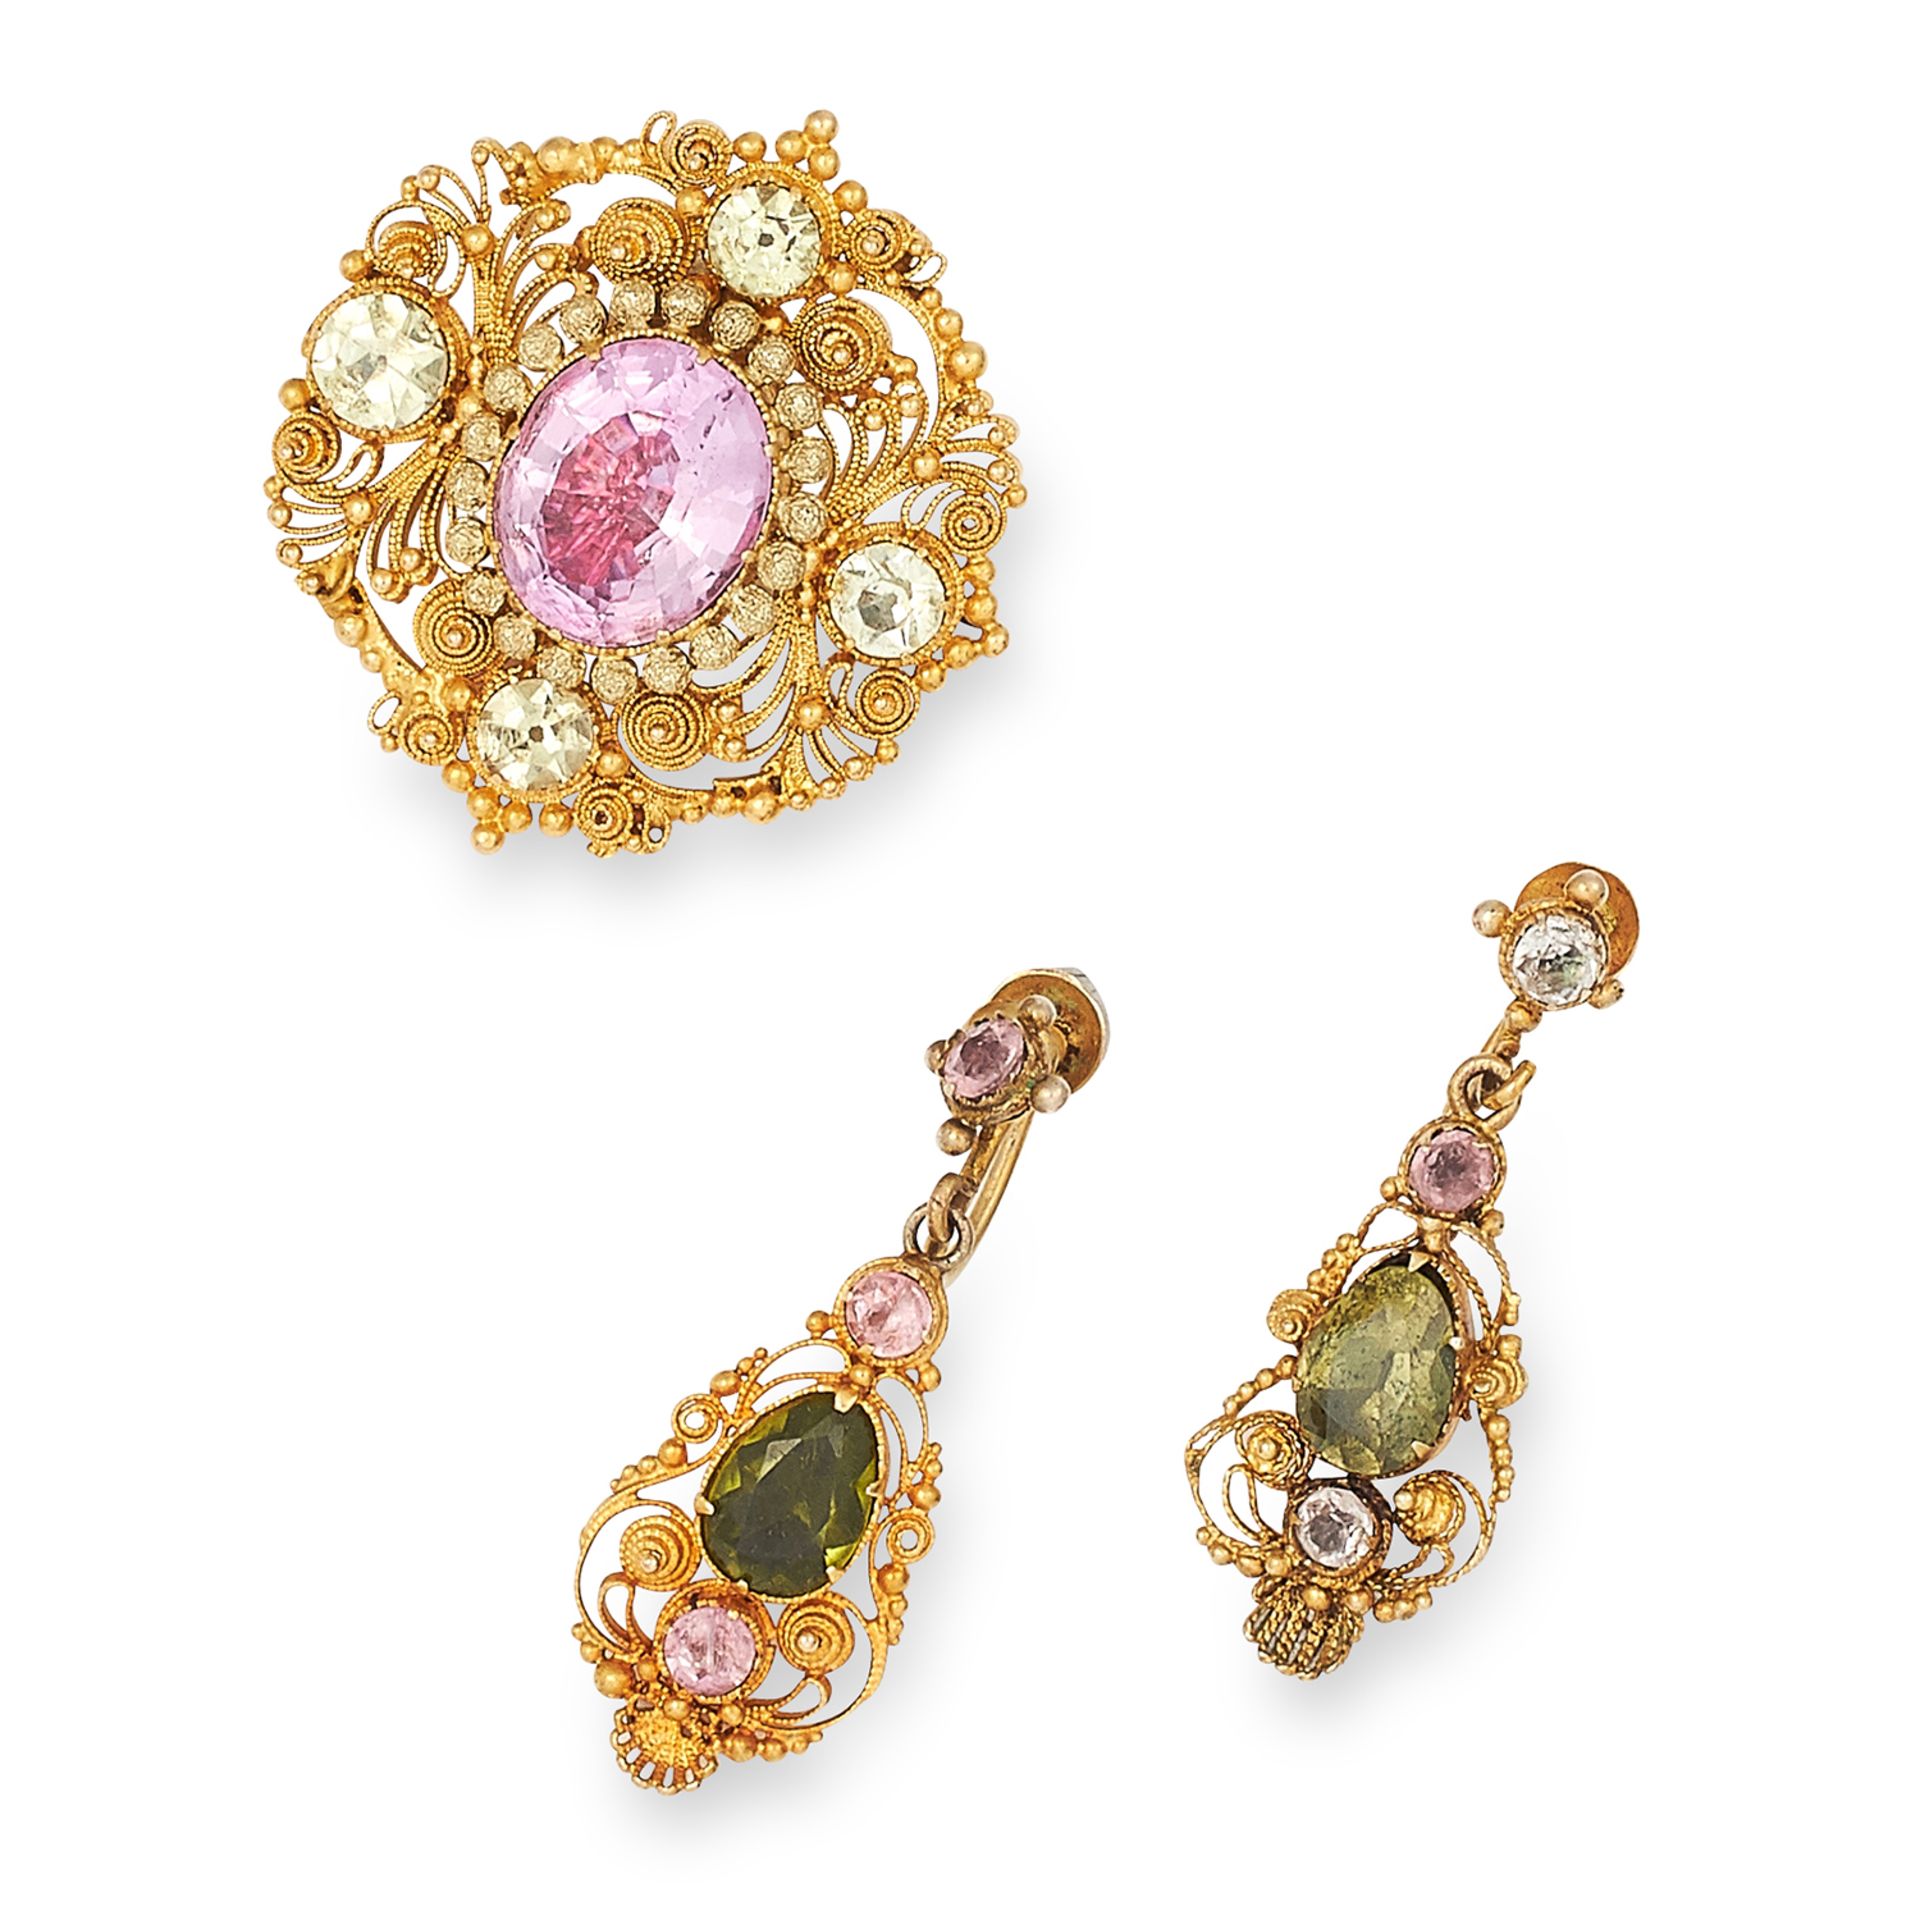 ANTIQUE GEORGIAN PINK TOPAZ AND CHRYSOBERYL NECKLACE, EARRING AND BROOCH DEMI PATURE set with round, - Bild 2 aus 2